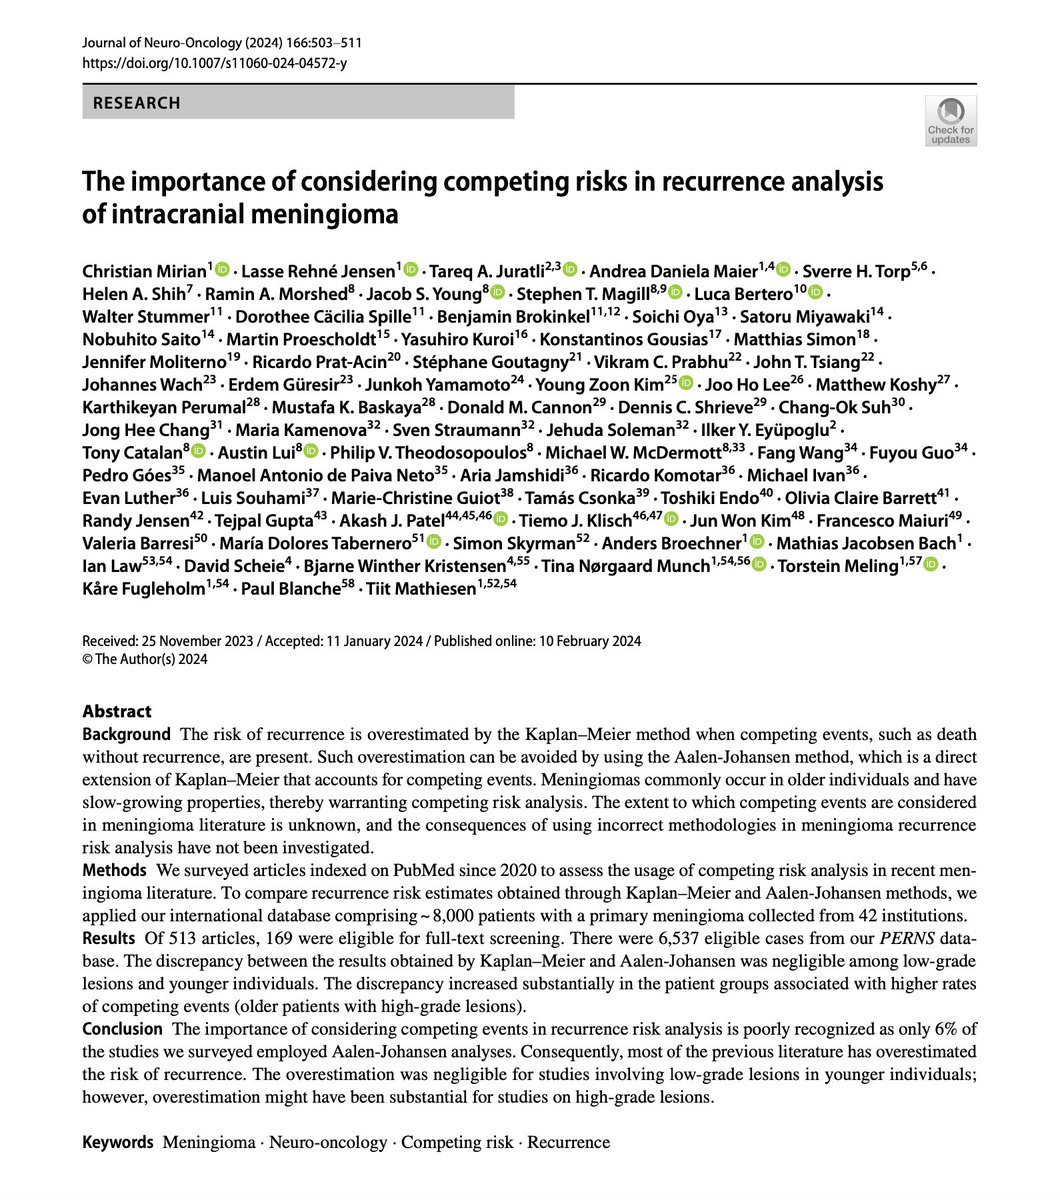 🧠 Our latest article in the Journal of Neuro-Oncology sheds light on the crucial consideration of competing risks. Titled 'The Importance of Considering Competing Risks in Recurrence Analysis of Intracranial Meningioma link.springer.com/article/10.100… #NeuroOncology #Meningioma